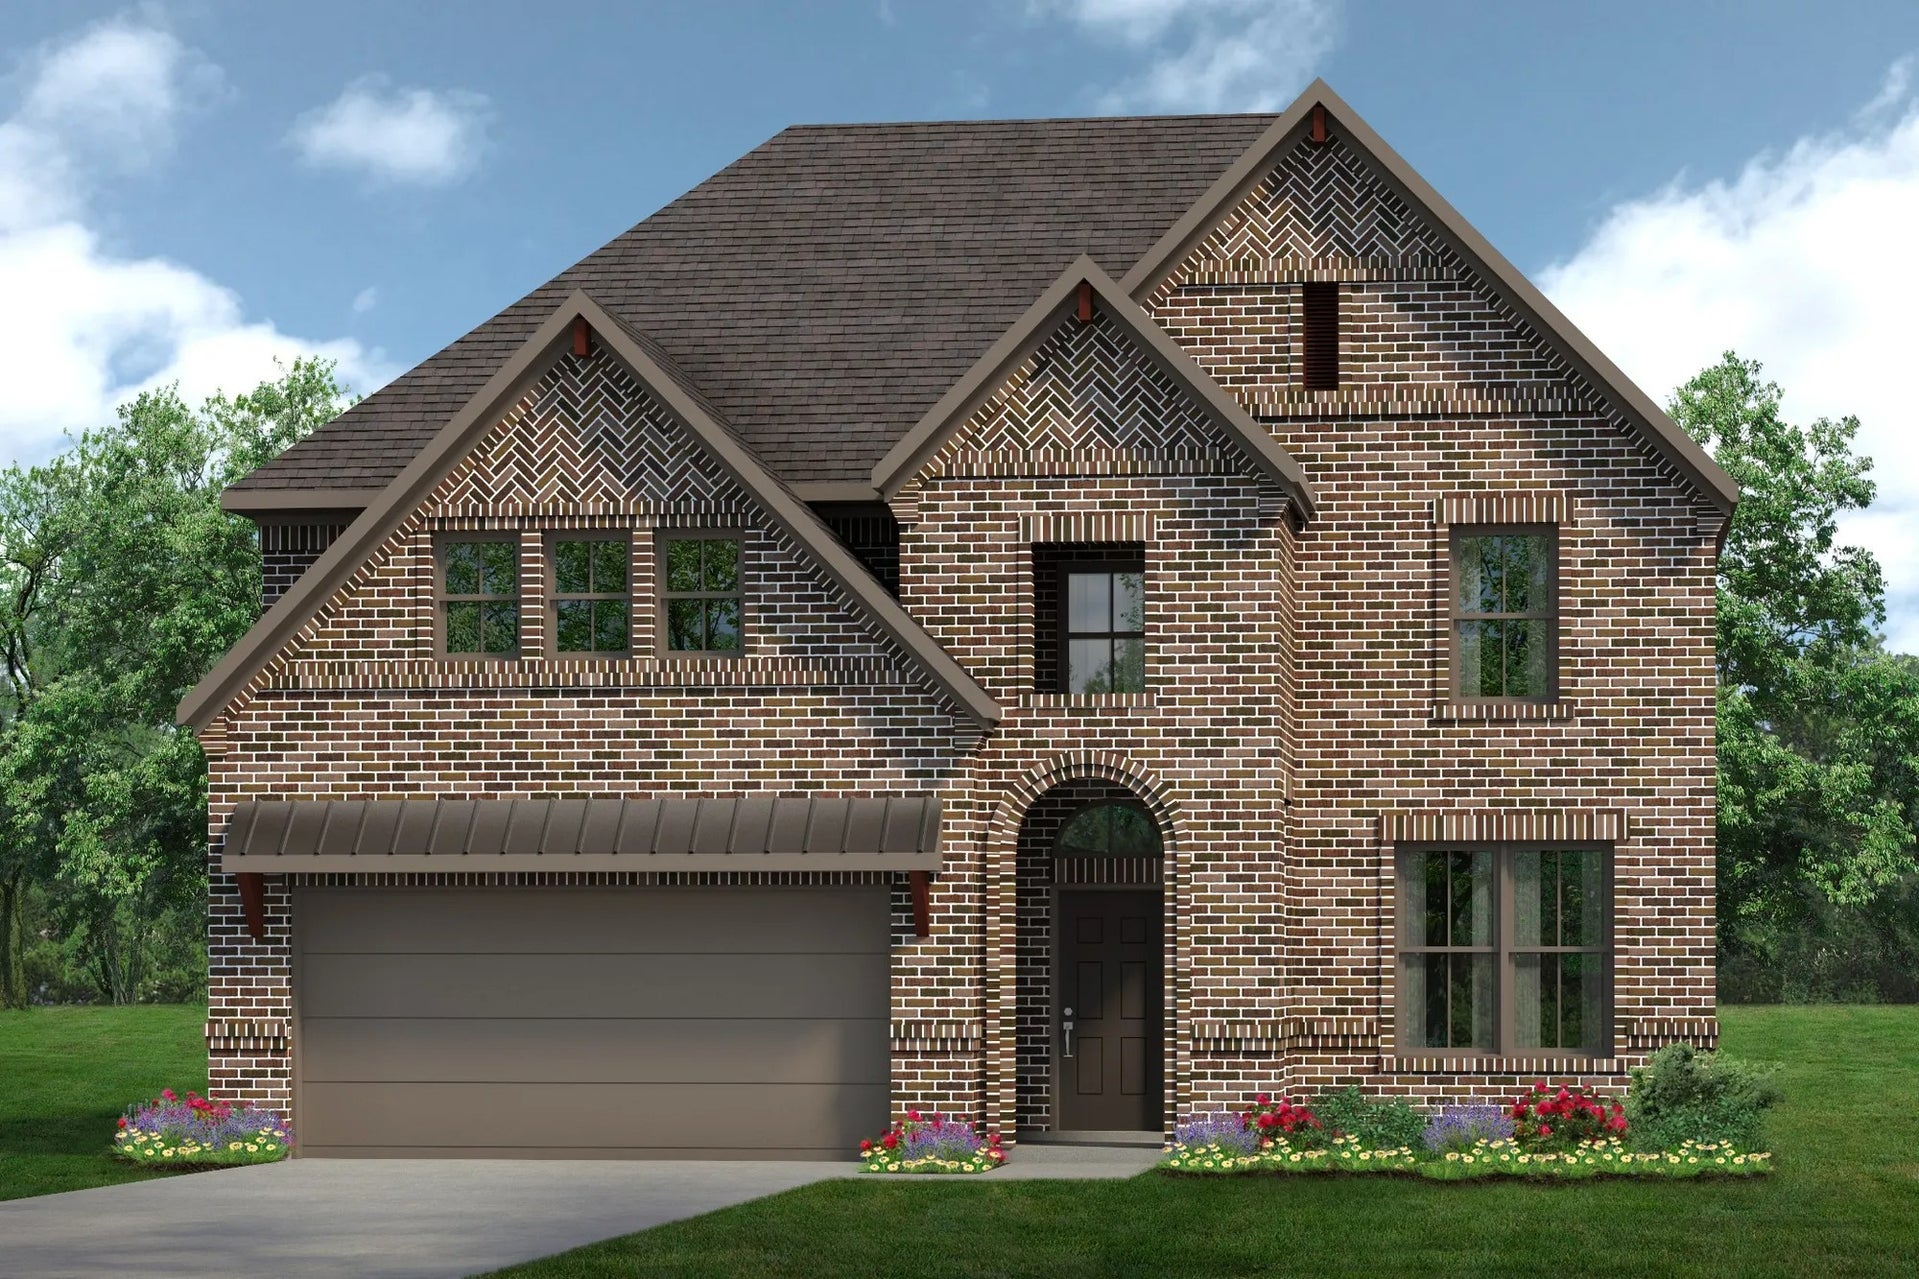 2844 C. 2,844sf New Home in Crowley, TX